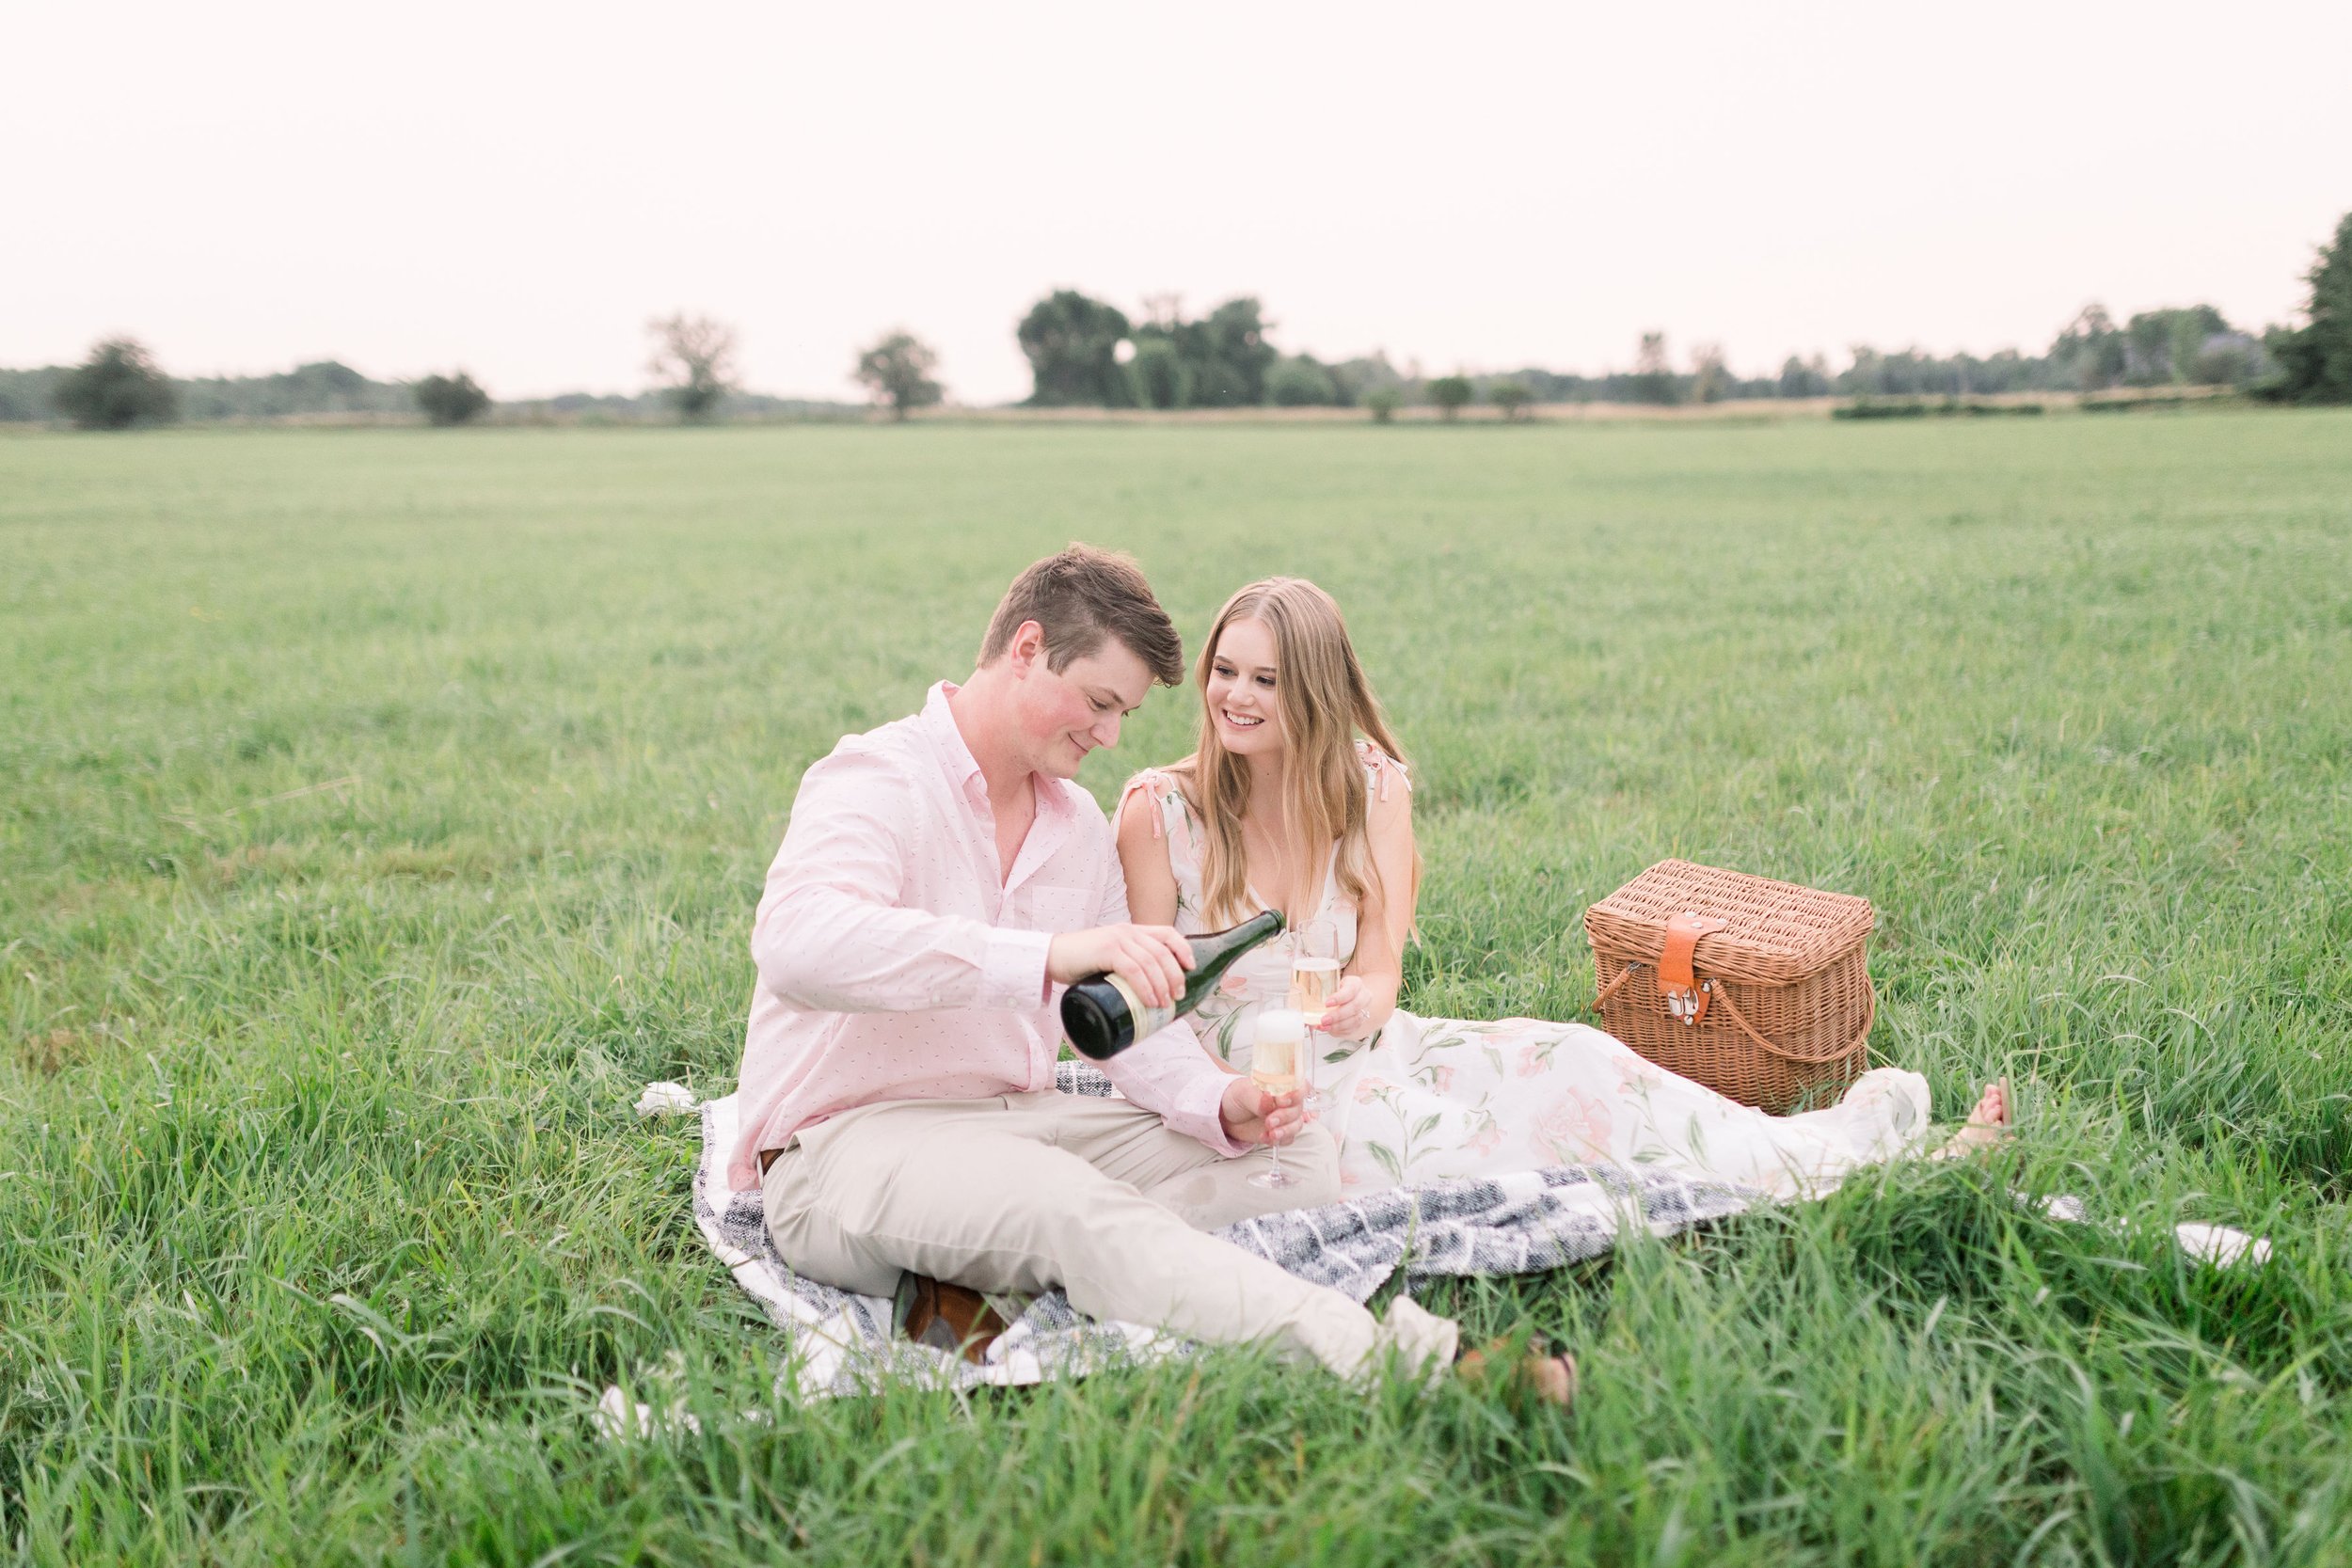  Fiances celebrate with champagne sitting on a picnic blanket in a grass field by Chelsea Mason photography. Picnic wedding celebration #ChelseaMasonPhotography #ChelseaMasonEngagements #PinheysPointEngagements #OttawaEngagementPhotography 